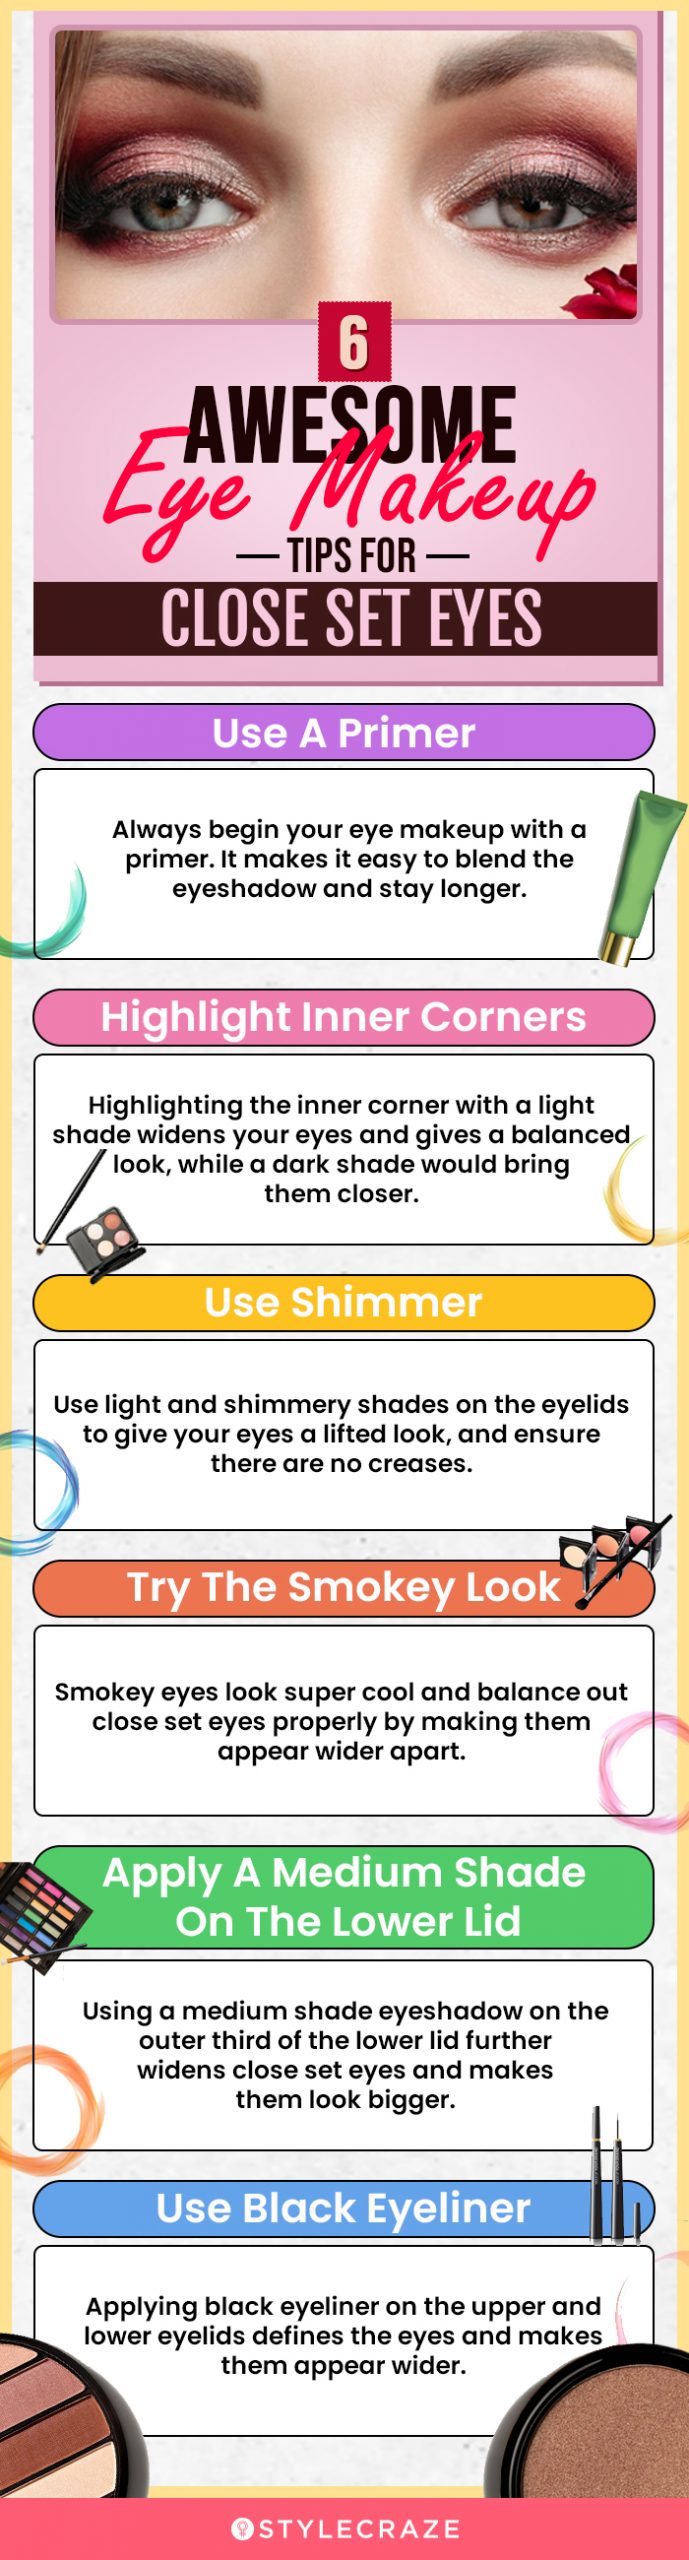 6 awesome eye makeup tips for close set eyes (infographic)